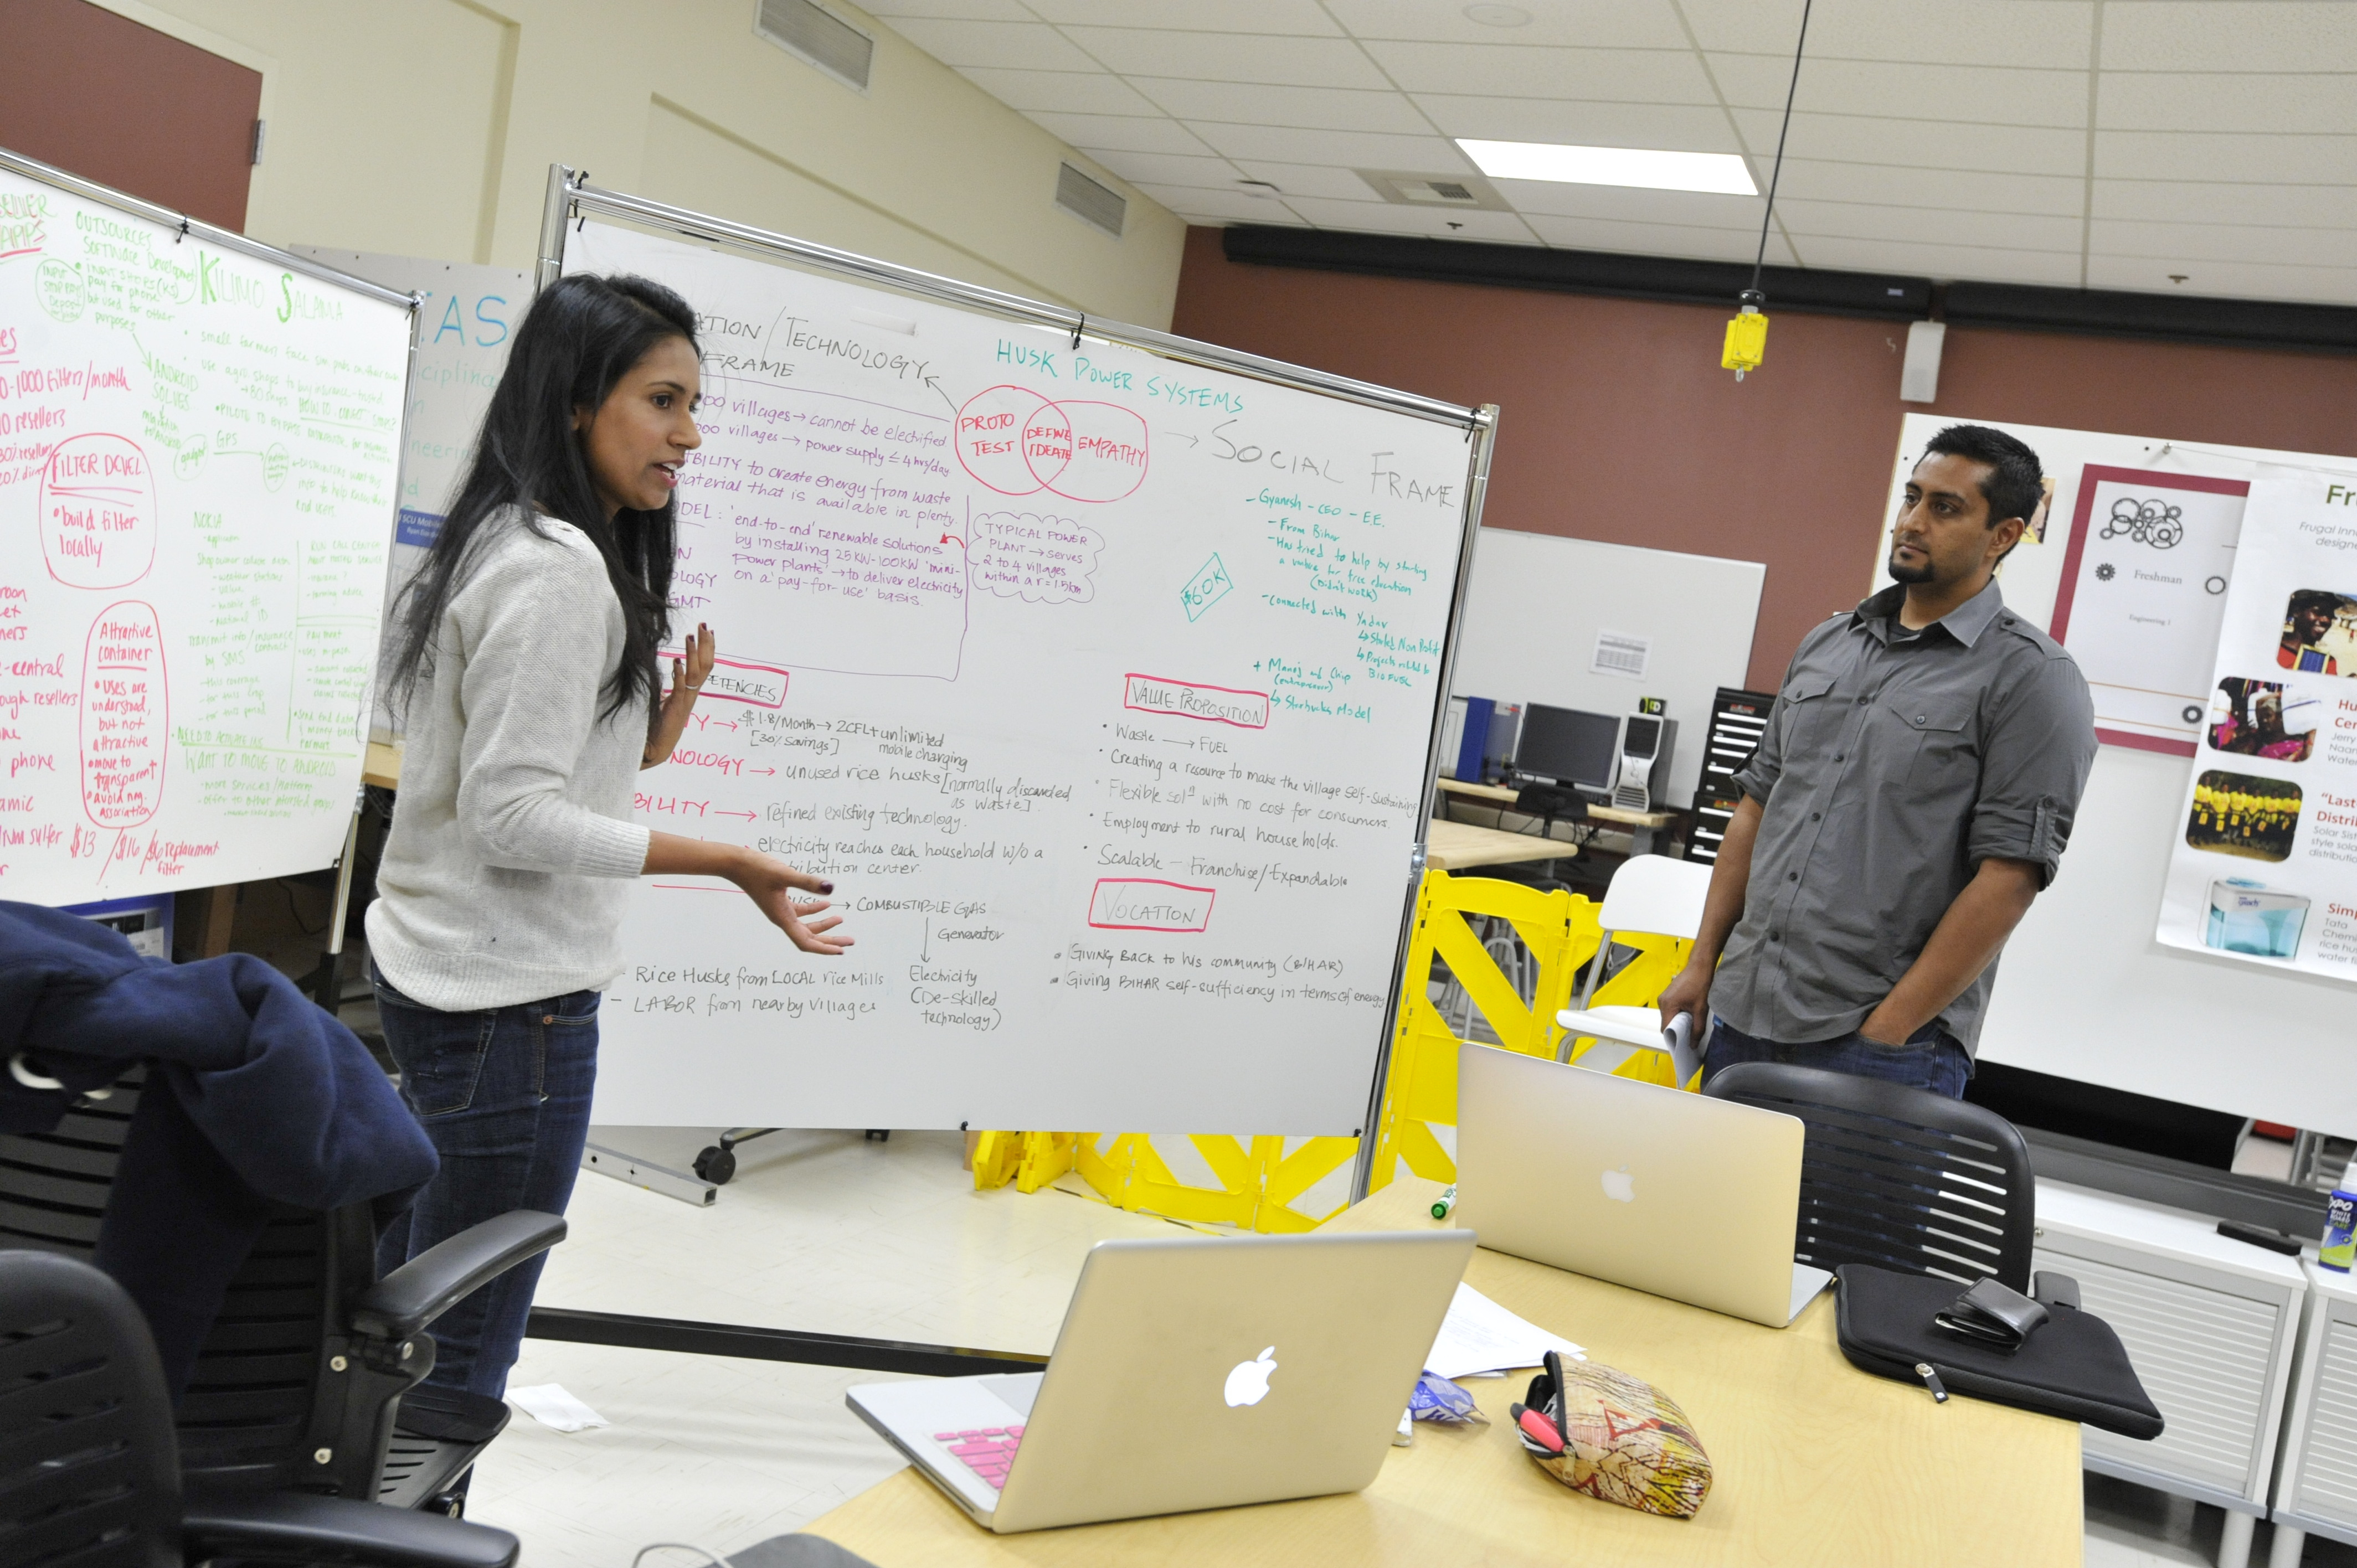 Two students stand in front of a white board with brainstorming work on it, presenting to colleagues. image link to story